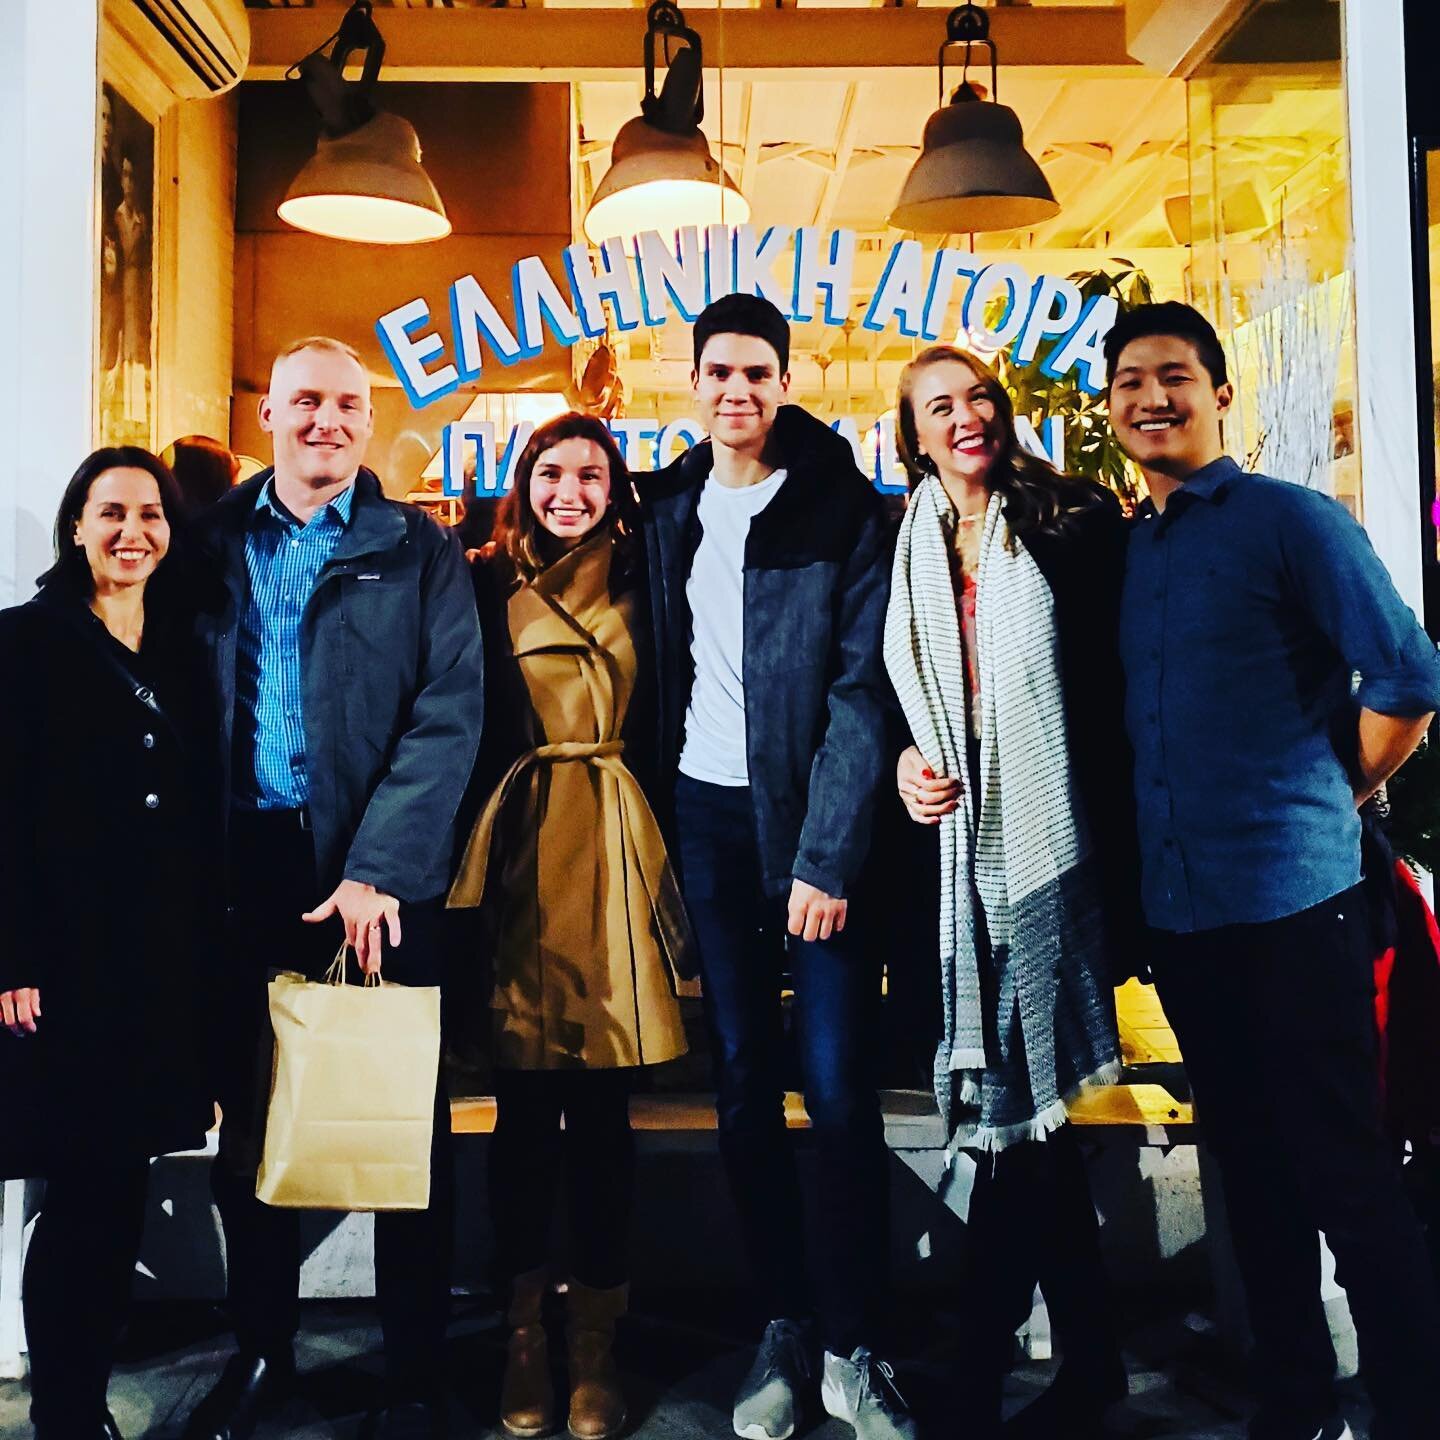 Happy holidays to all! Much gratitude to our amazing team! Wonderful night out at local venues for our holiday party. @mamakastaverna, which was delicious and Toronto&rsquo;s pop up holiday bar @miracletoronto, which was a blast. Check them out!